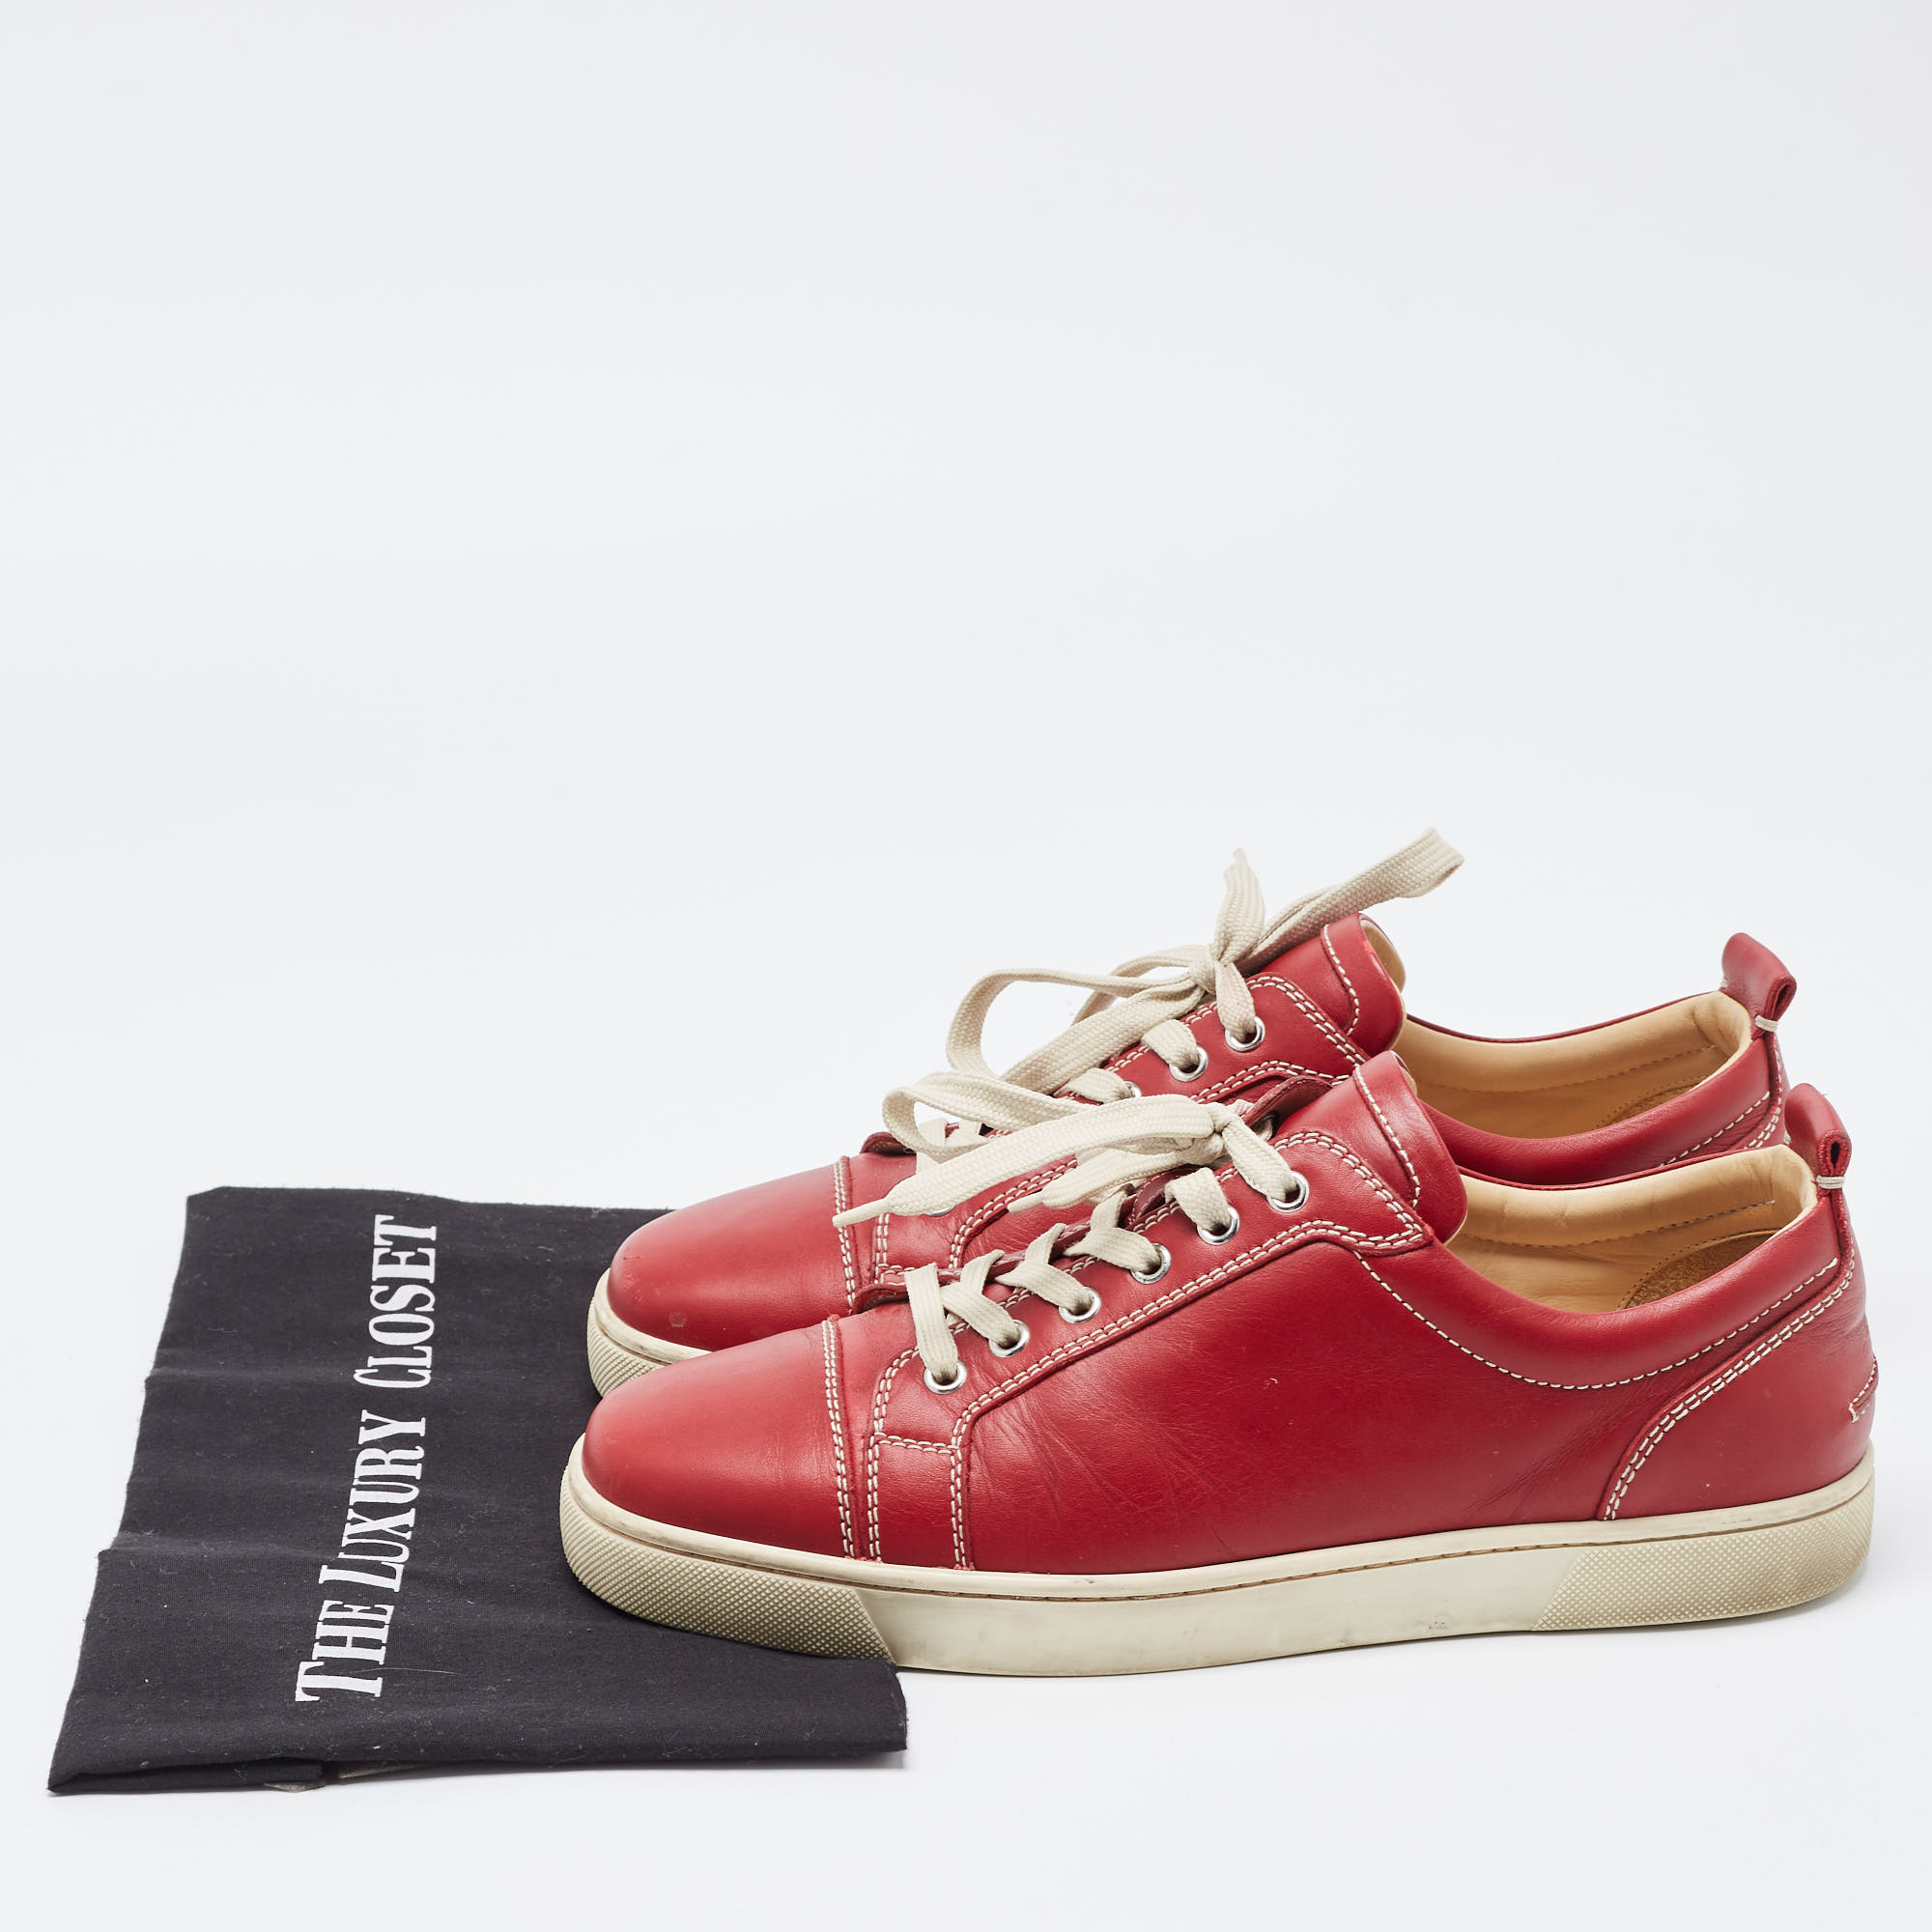 Christian Louboutin Red Leather Sneakers Size 42.5